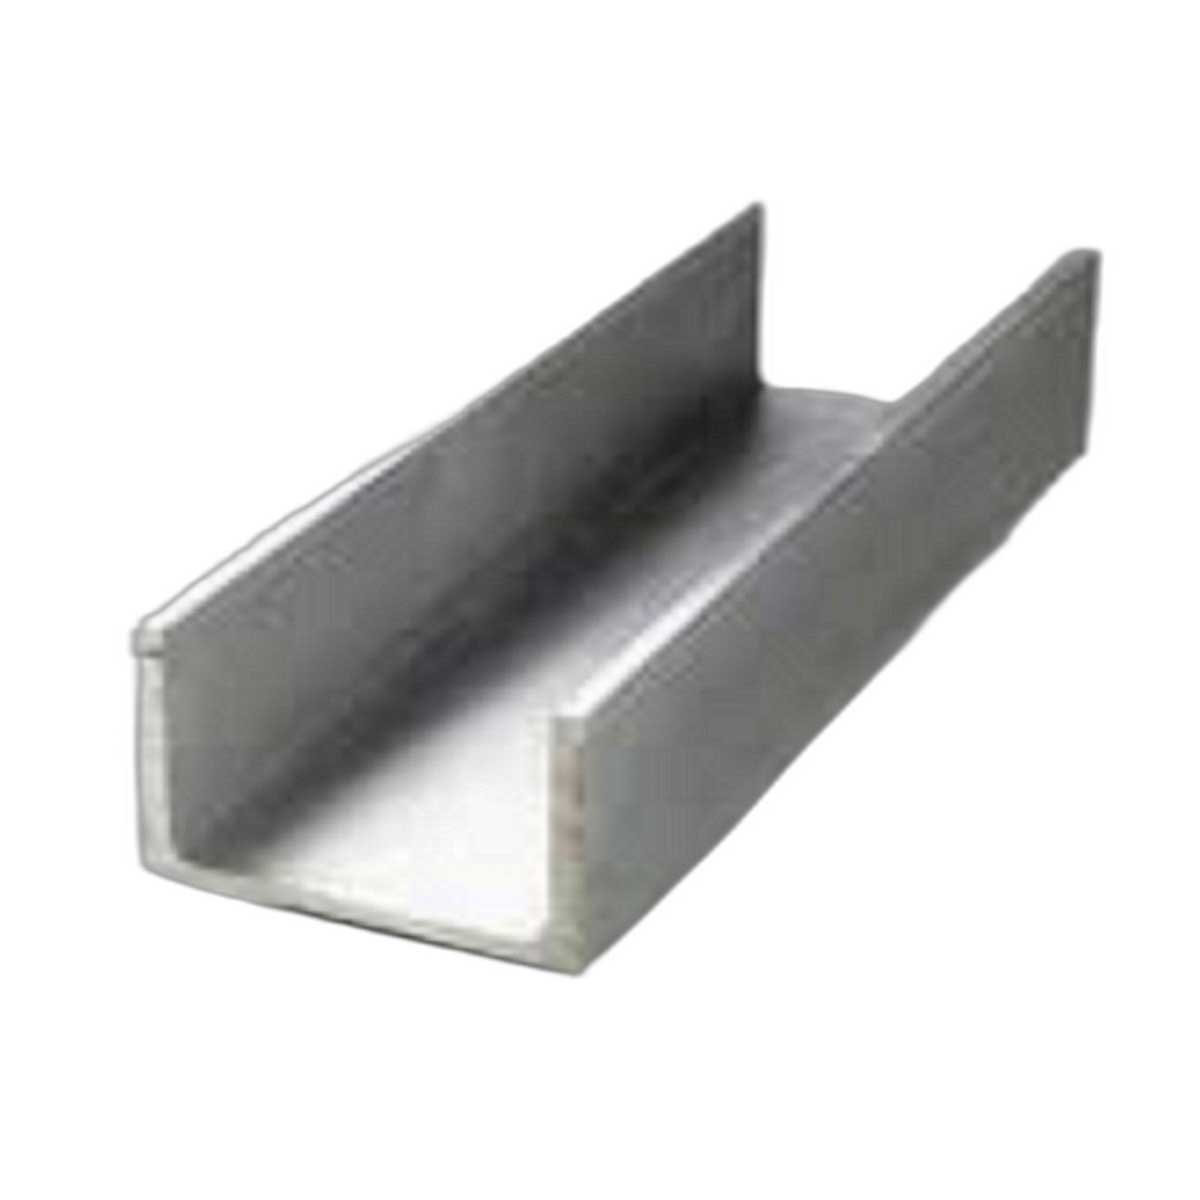 Aluminium U Shaped Channel Manufacturers, Suppliers in Anand